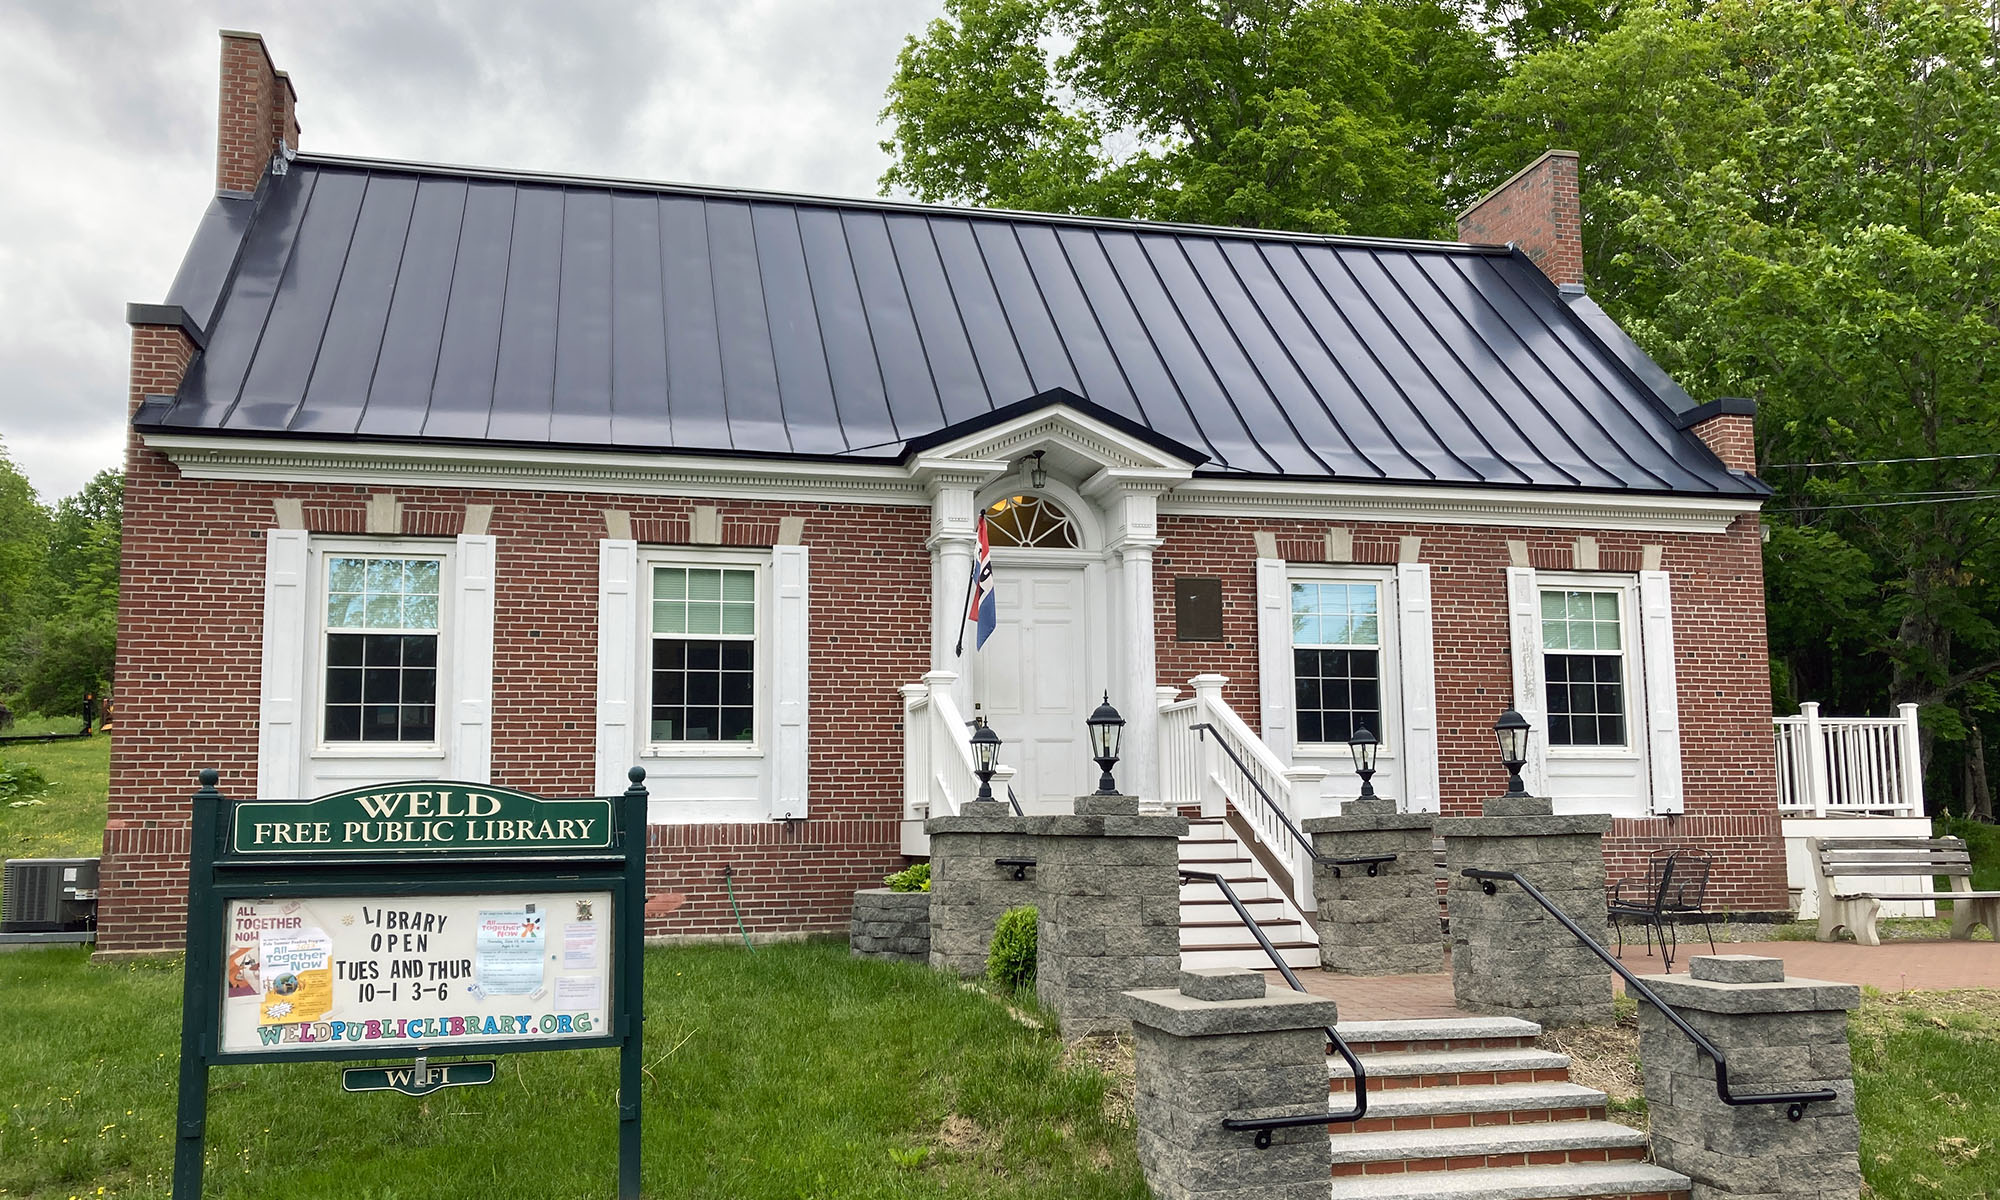 Weld Free Public Library